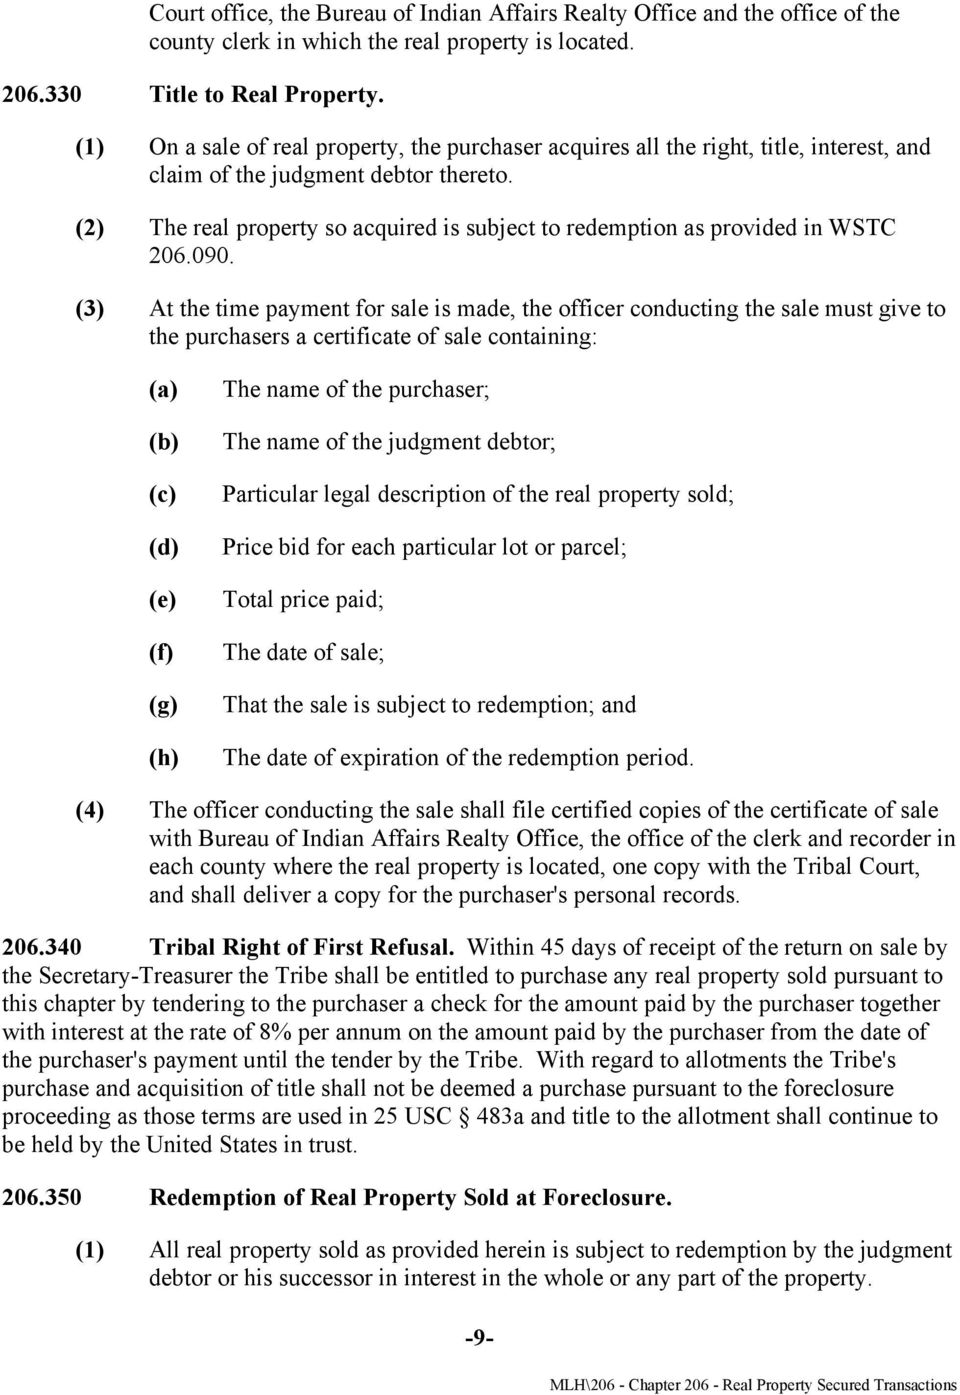 (2) The real property so acquired is subject to redemption as provided in WSTC 206.090.